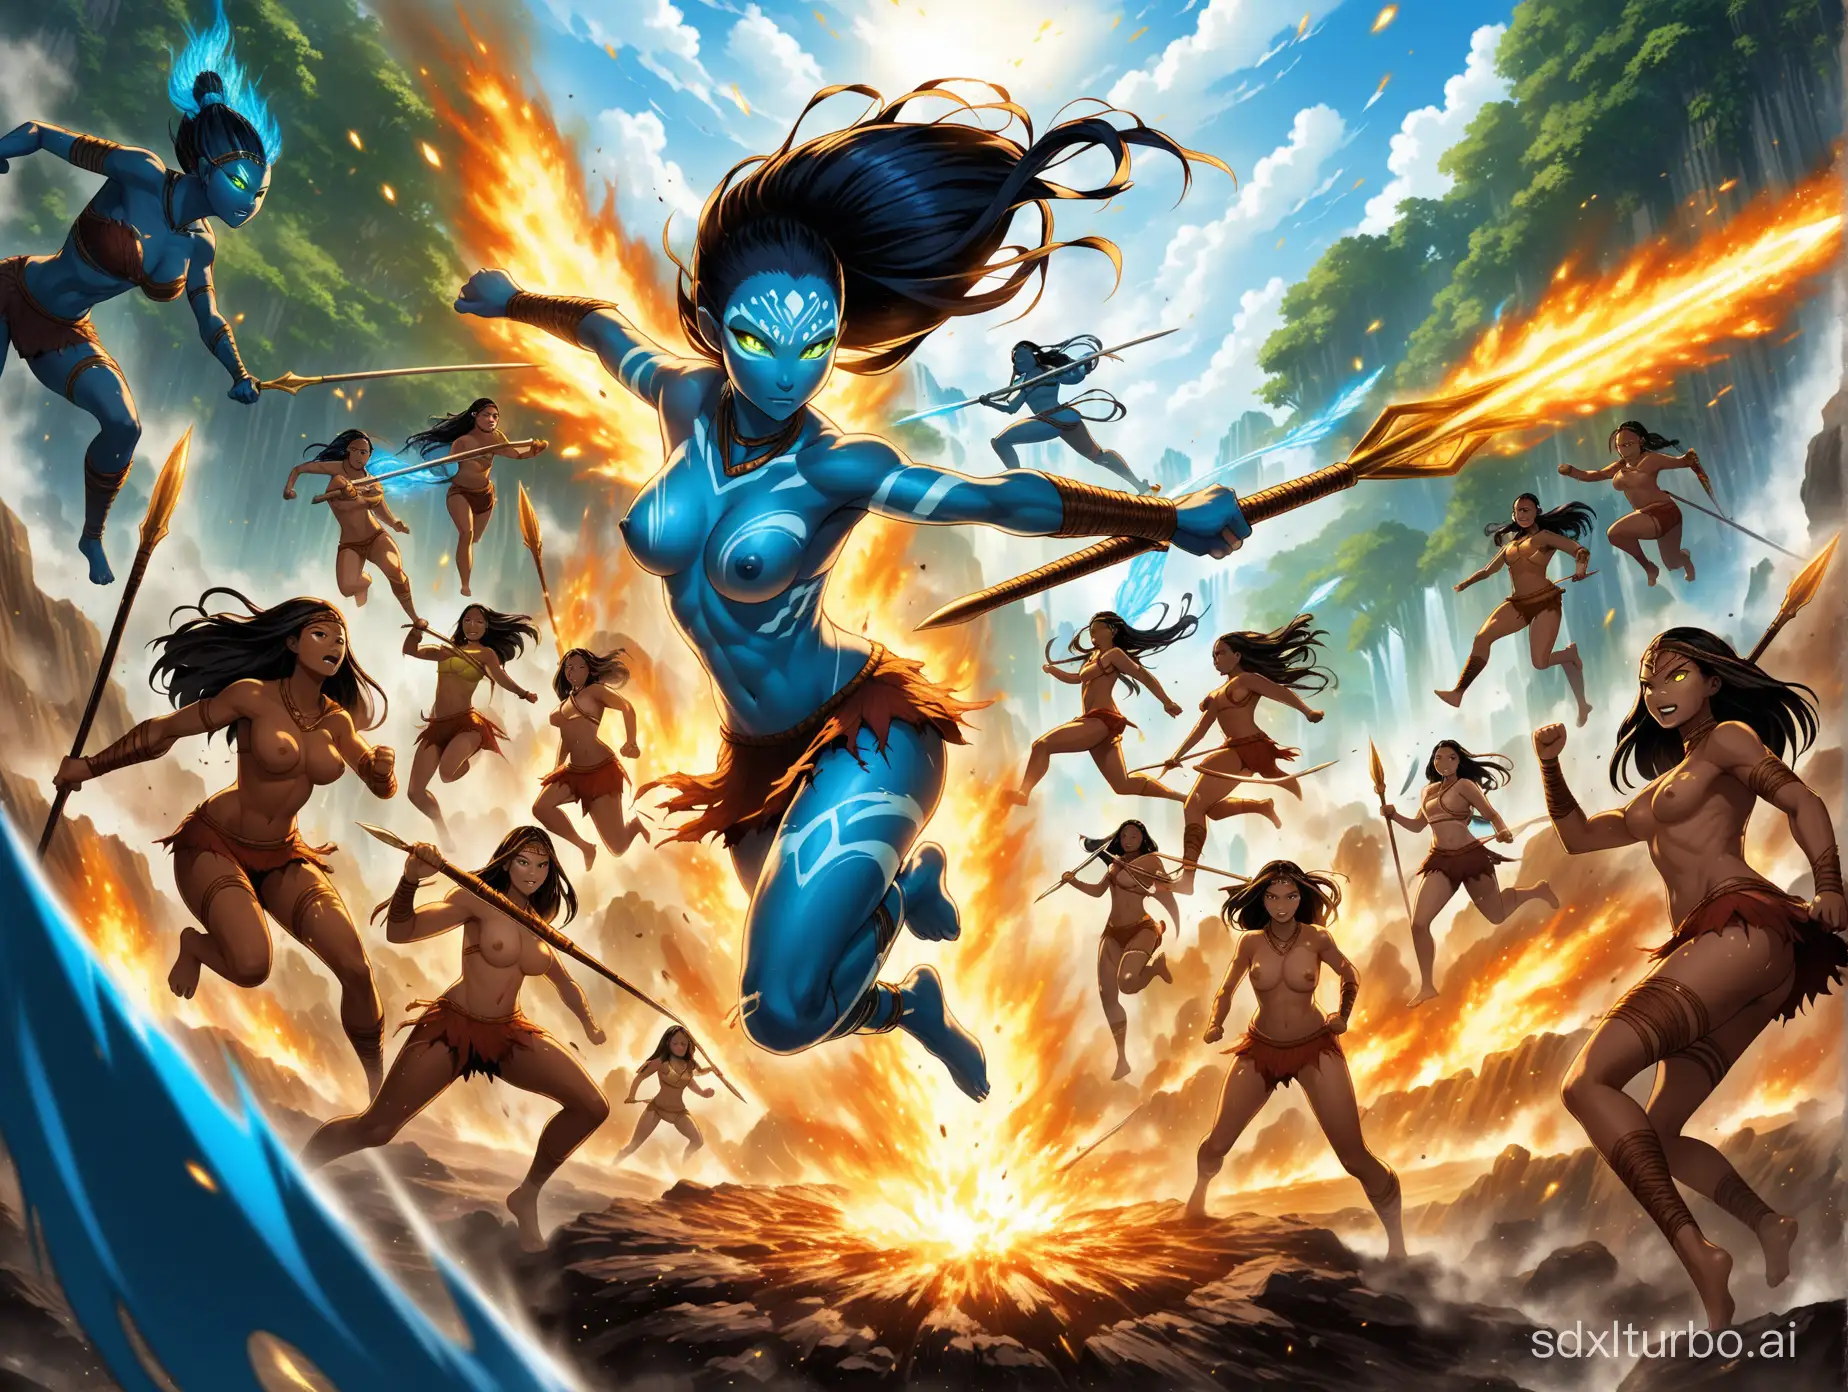 Intense-Battle-Blue-Avatar-Assassins-with-Superpower-Eyes-and-Spears